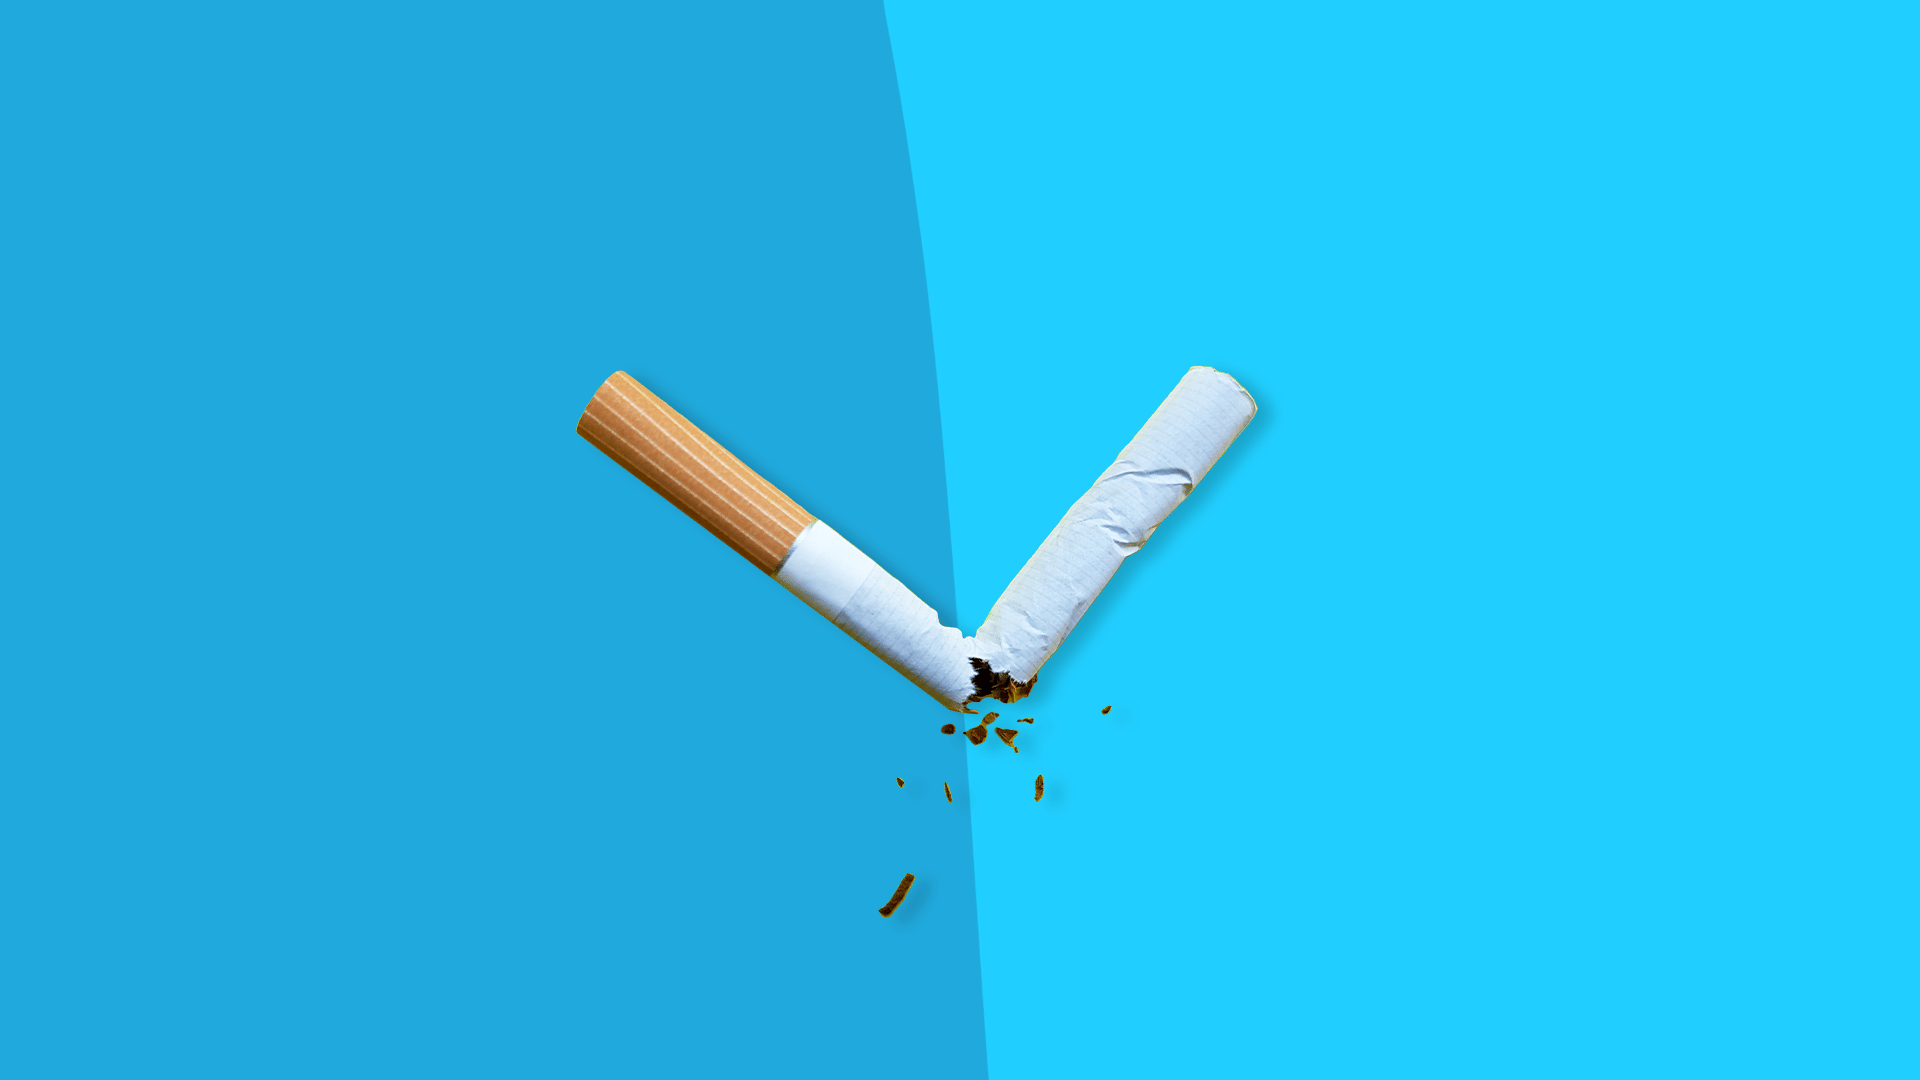 How much weight will you gain after you stop smoking?